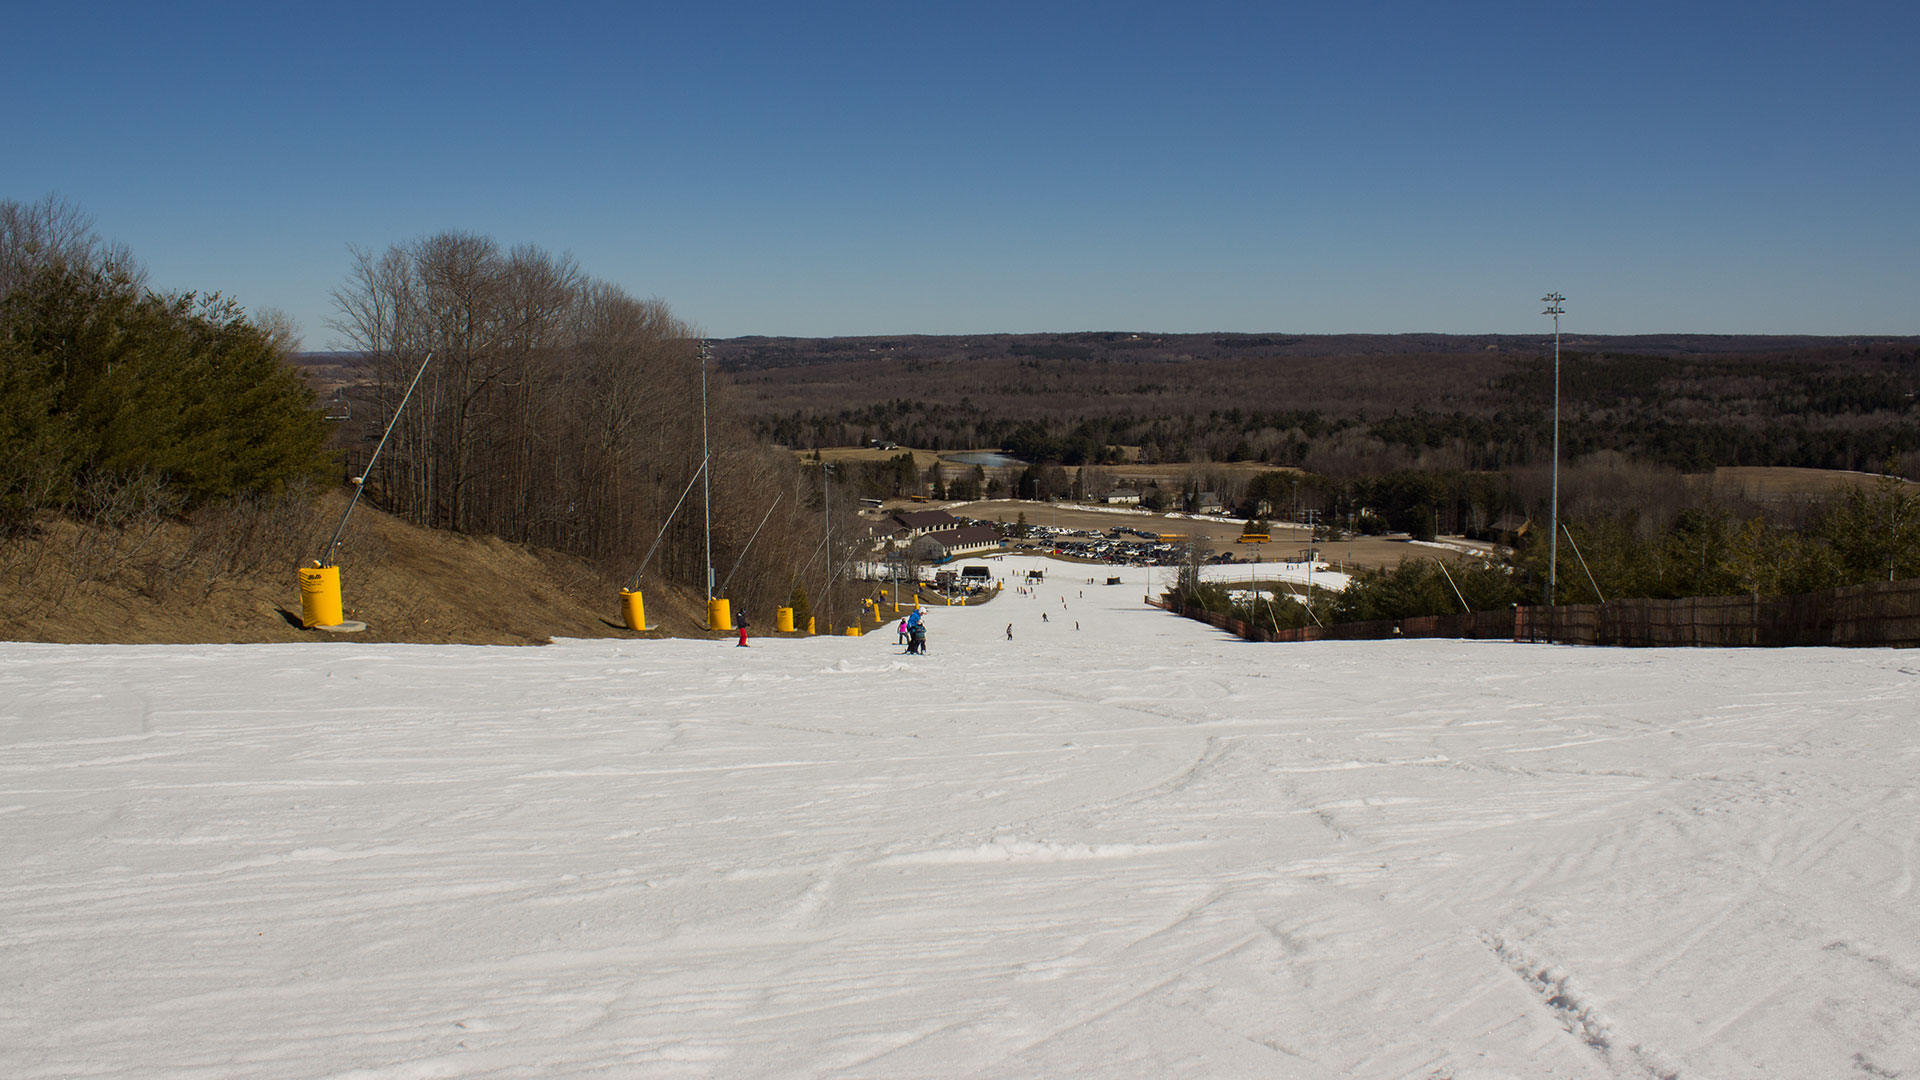 Mount St. Louis Moonstone – OUTSLOPES